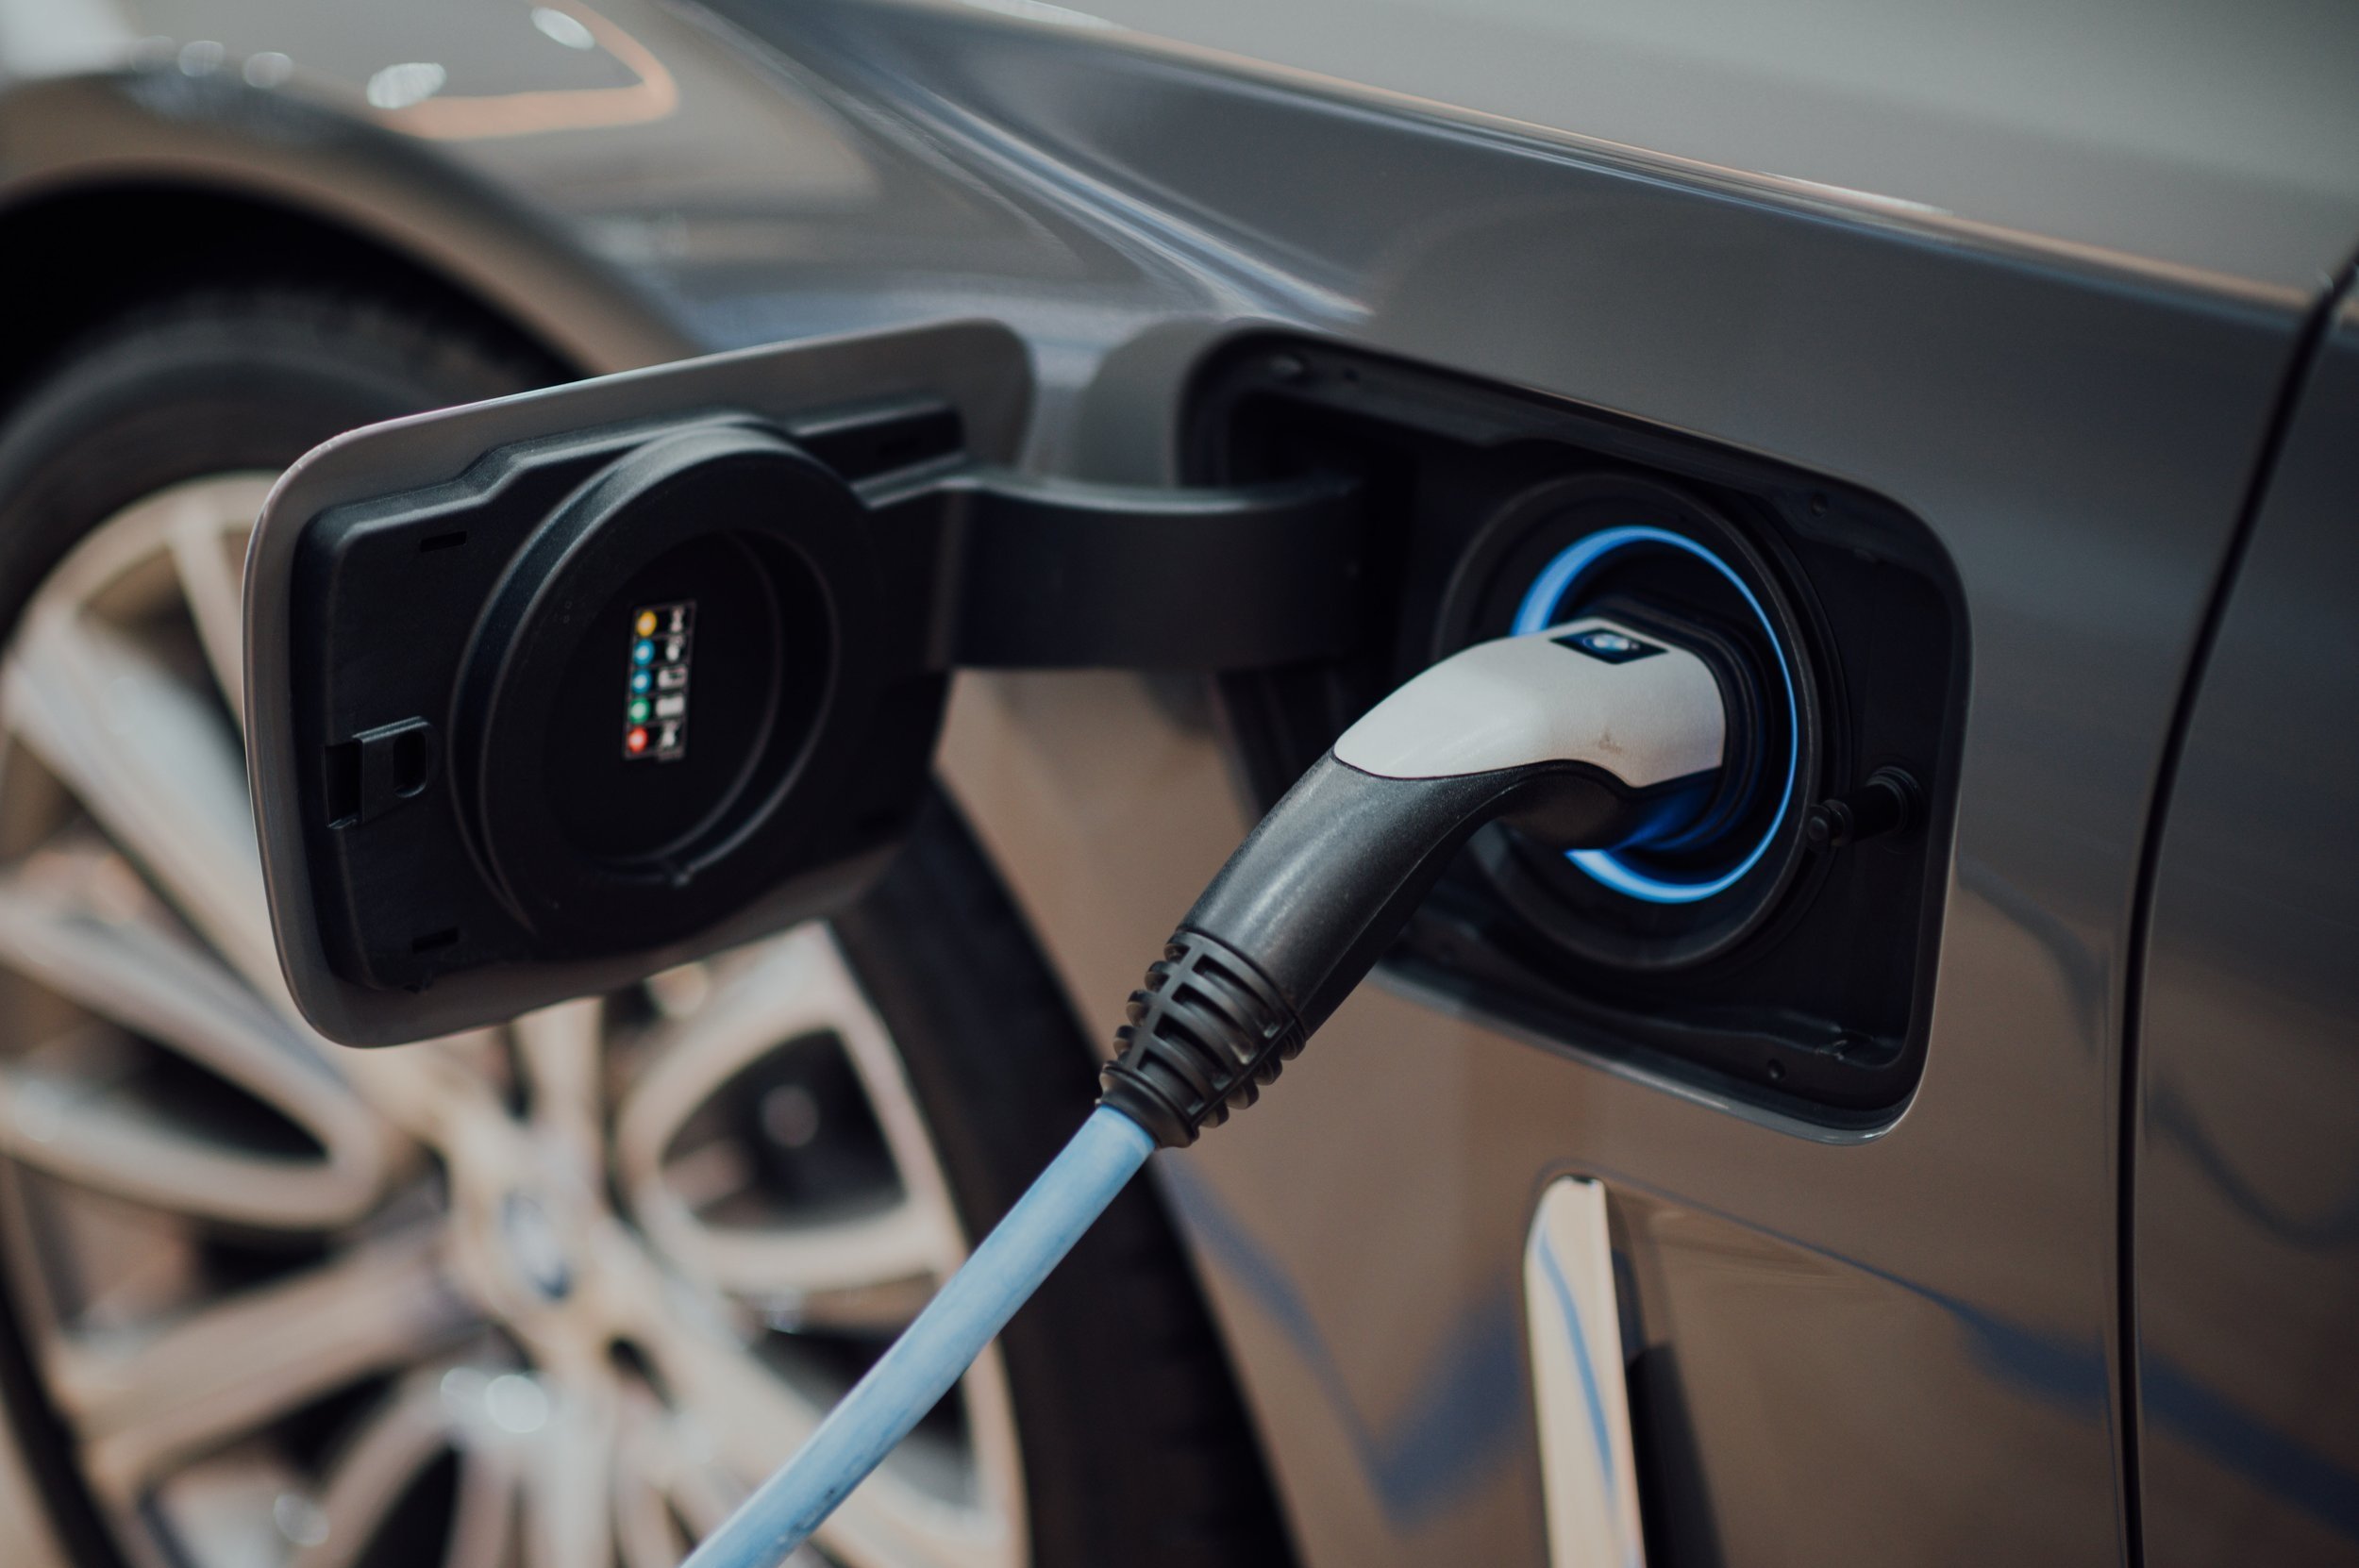   Electric Vehicles    Learn more  